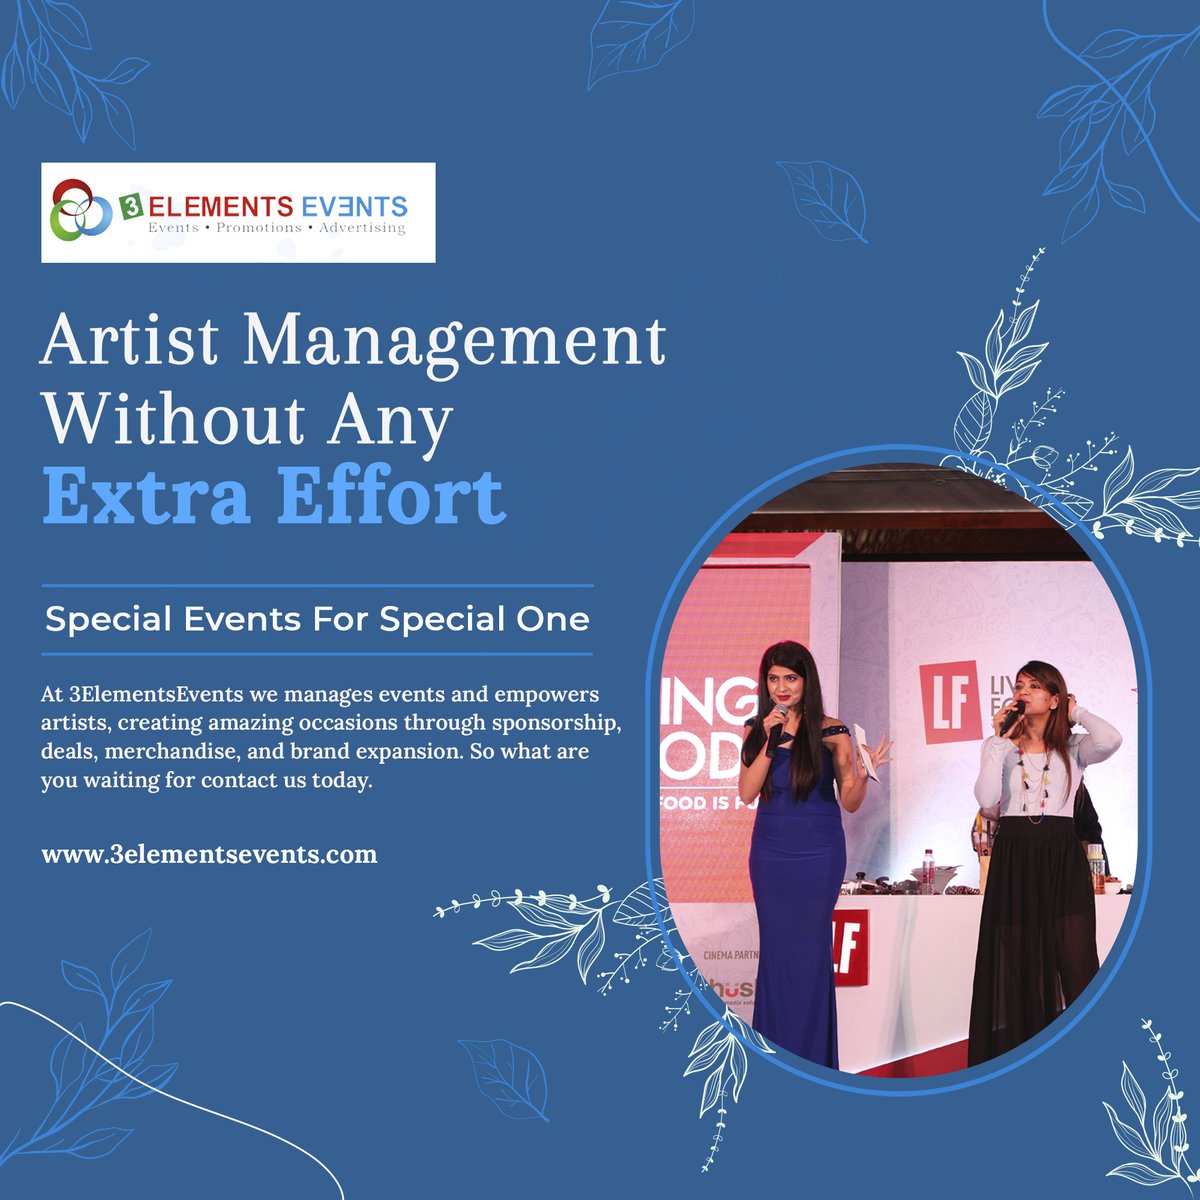 Let's turn your special moments into extraordinary memories.  

Reach us at : 9784982222 

#EventManagement #EventExcellence #UnforgettableExperiences #EventPlanningPros #TurningMomentsIntoMemories #CelebrationTime #PartyPerfection #EventManagement #CreateAndInspire #EventMastery